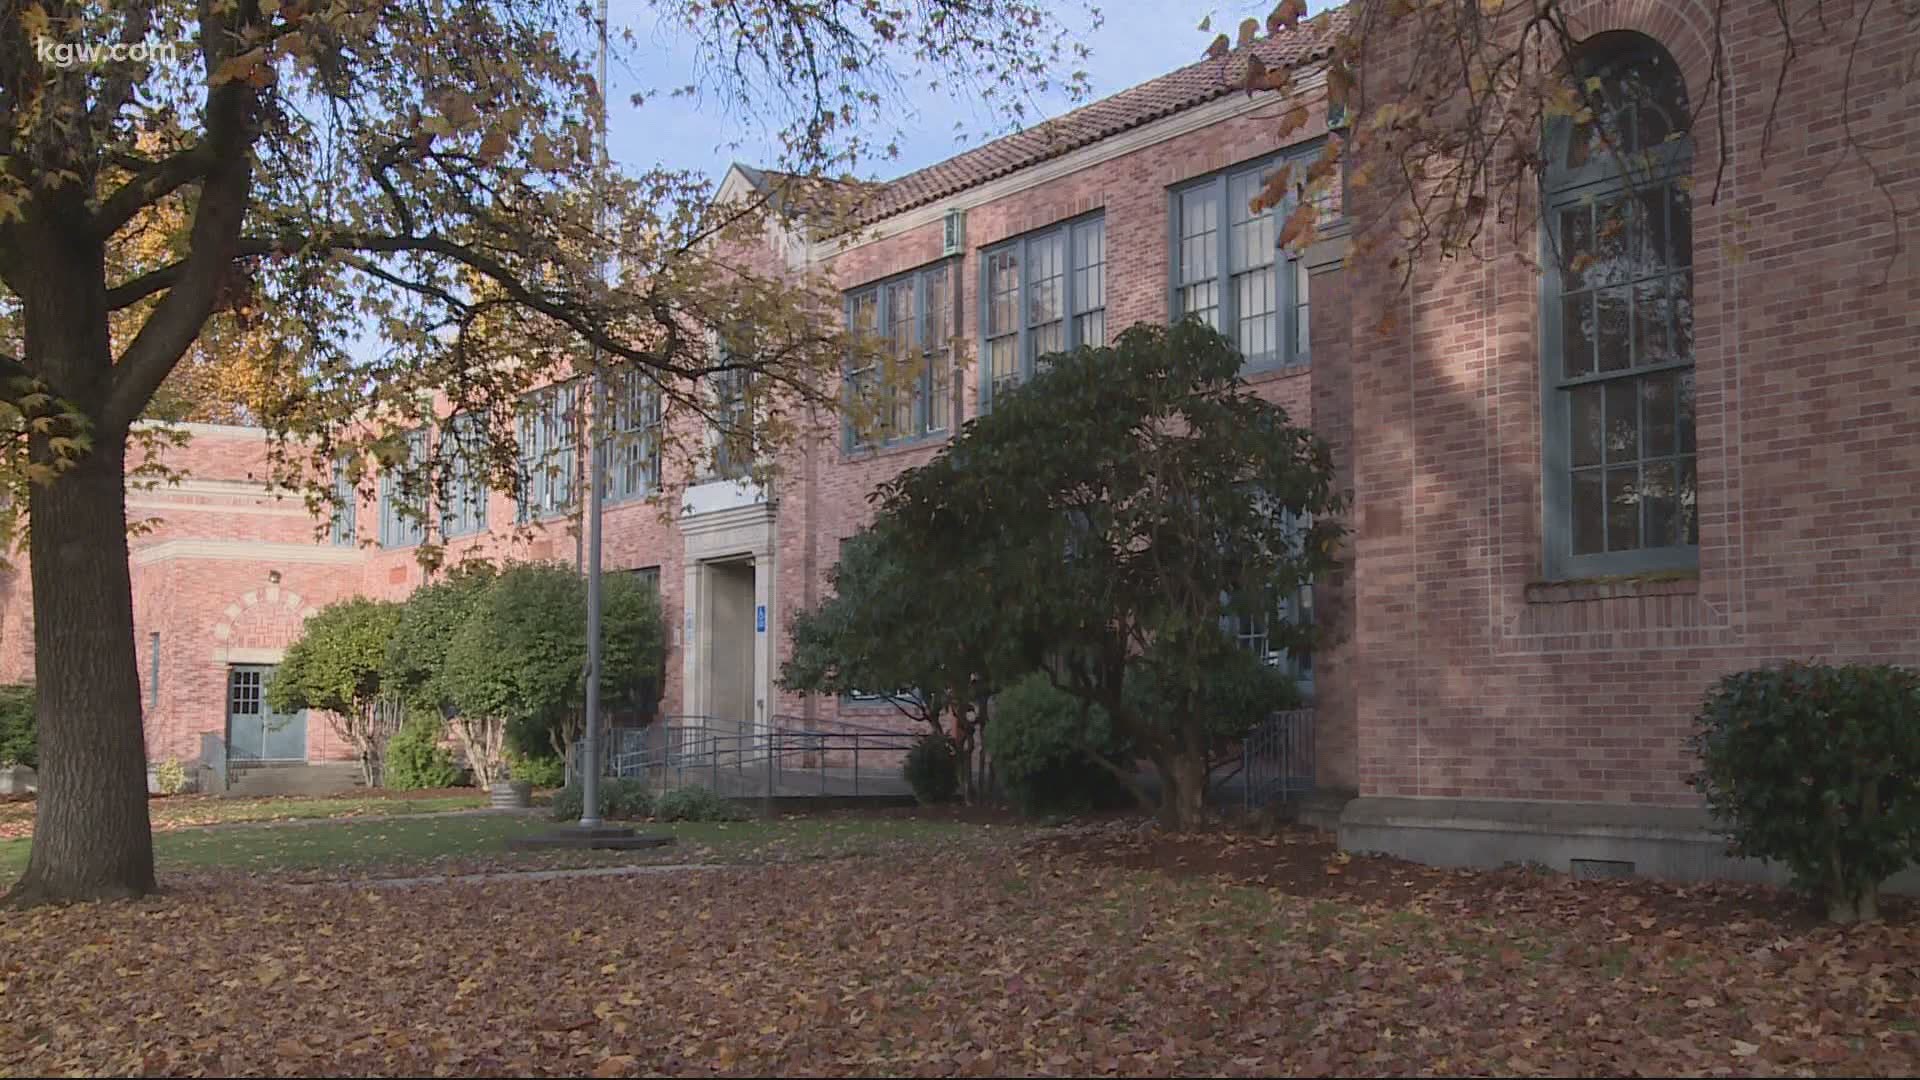 A group of Clackamas County parents will rally Thursday afternoon for a safe, in-person return to the classroom.